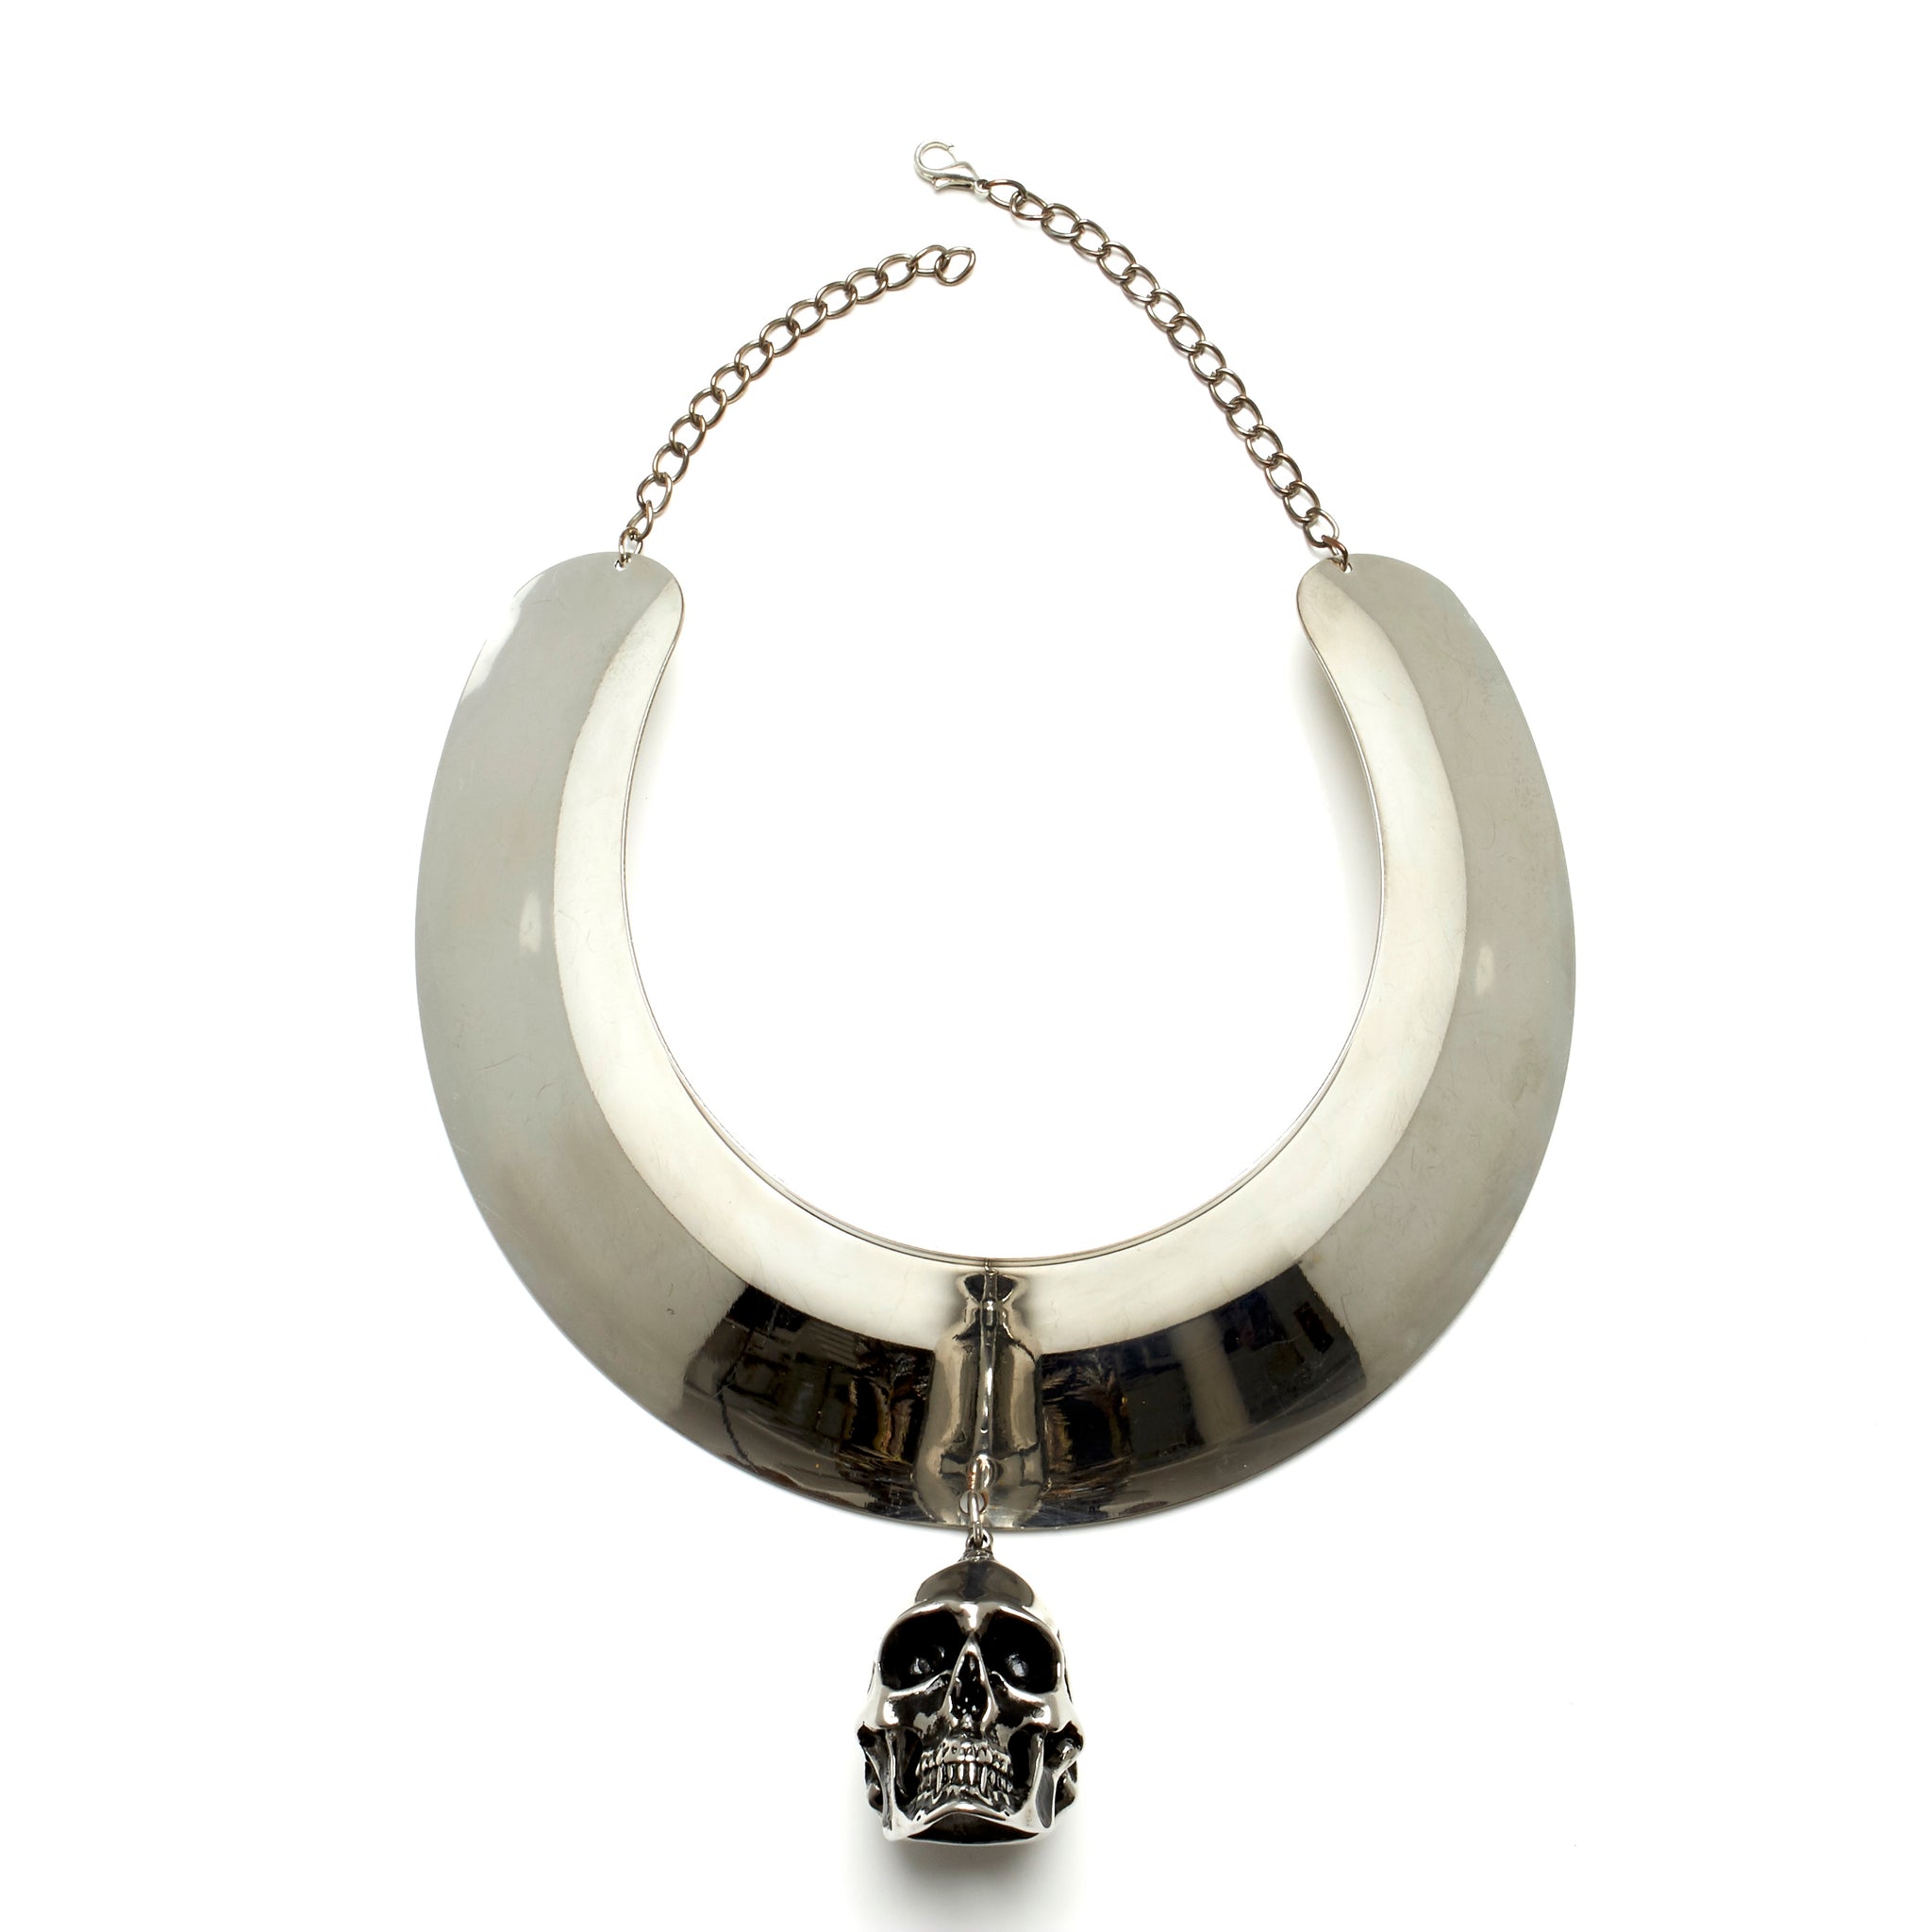 THICK TORQUE NECKLACE WITH LARGE STAINLESS STEEL SKULL PENDENT. BY NYET JEWELRY.